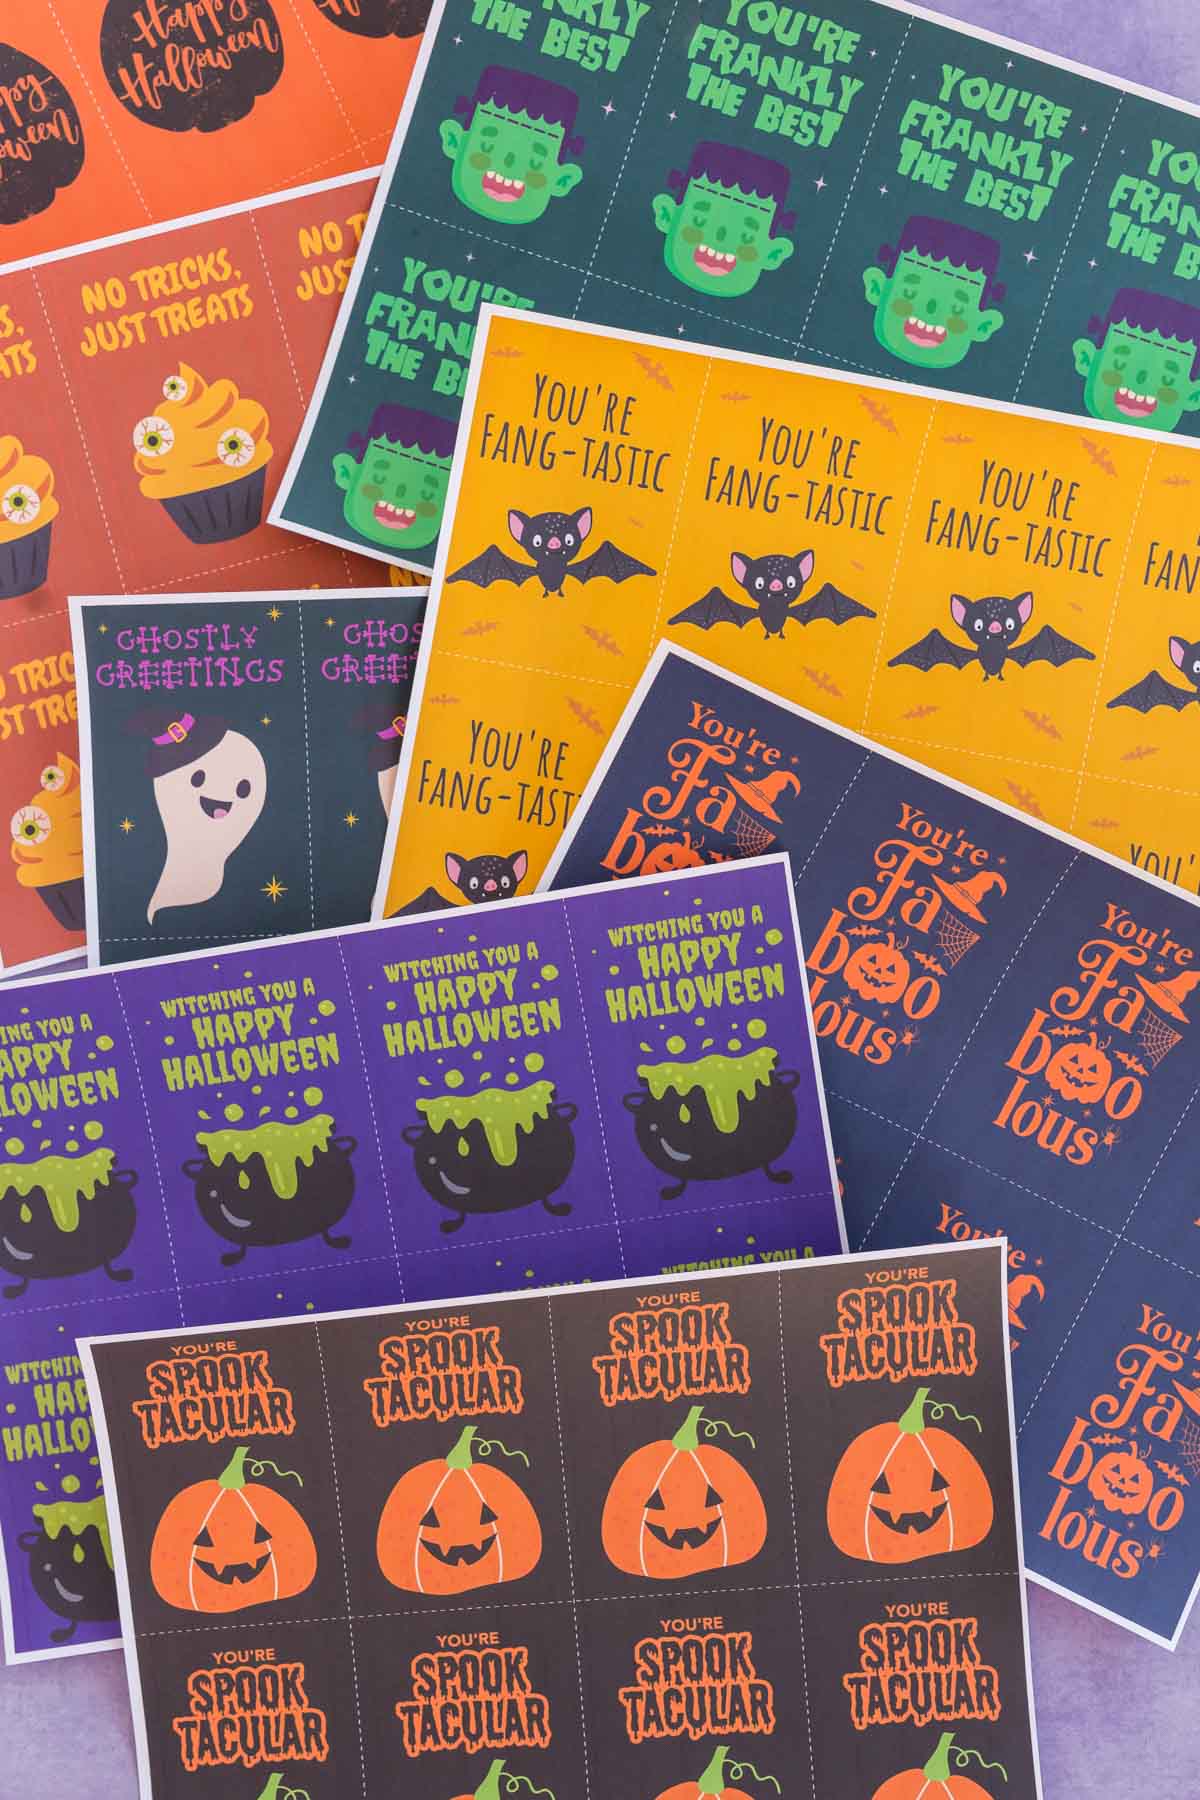 printed out Halloween gift tags in a pile